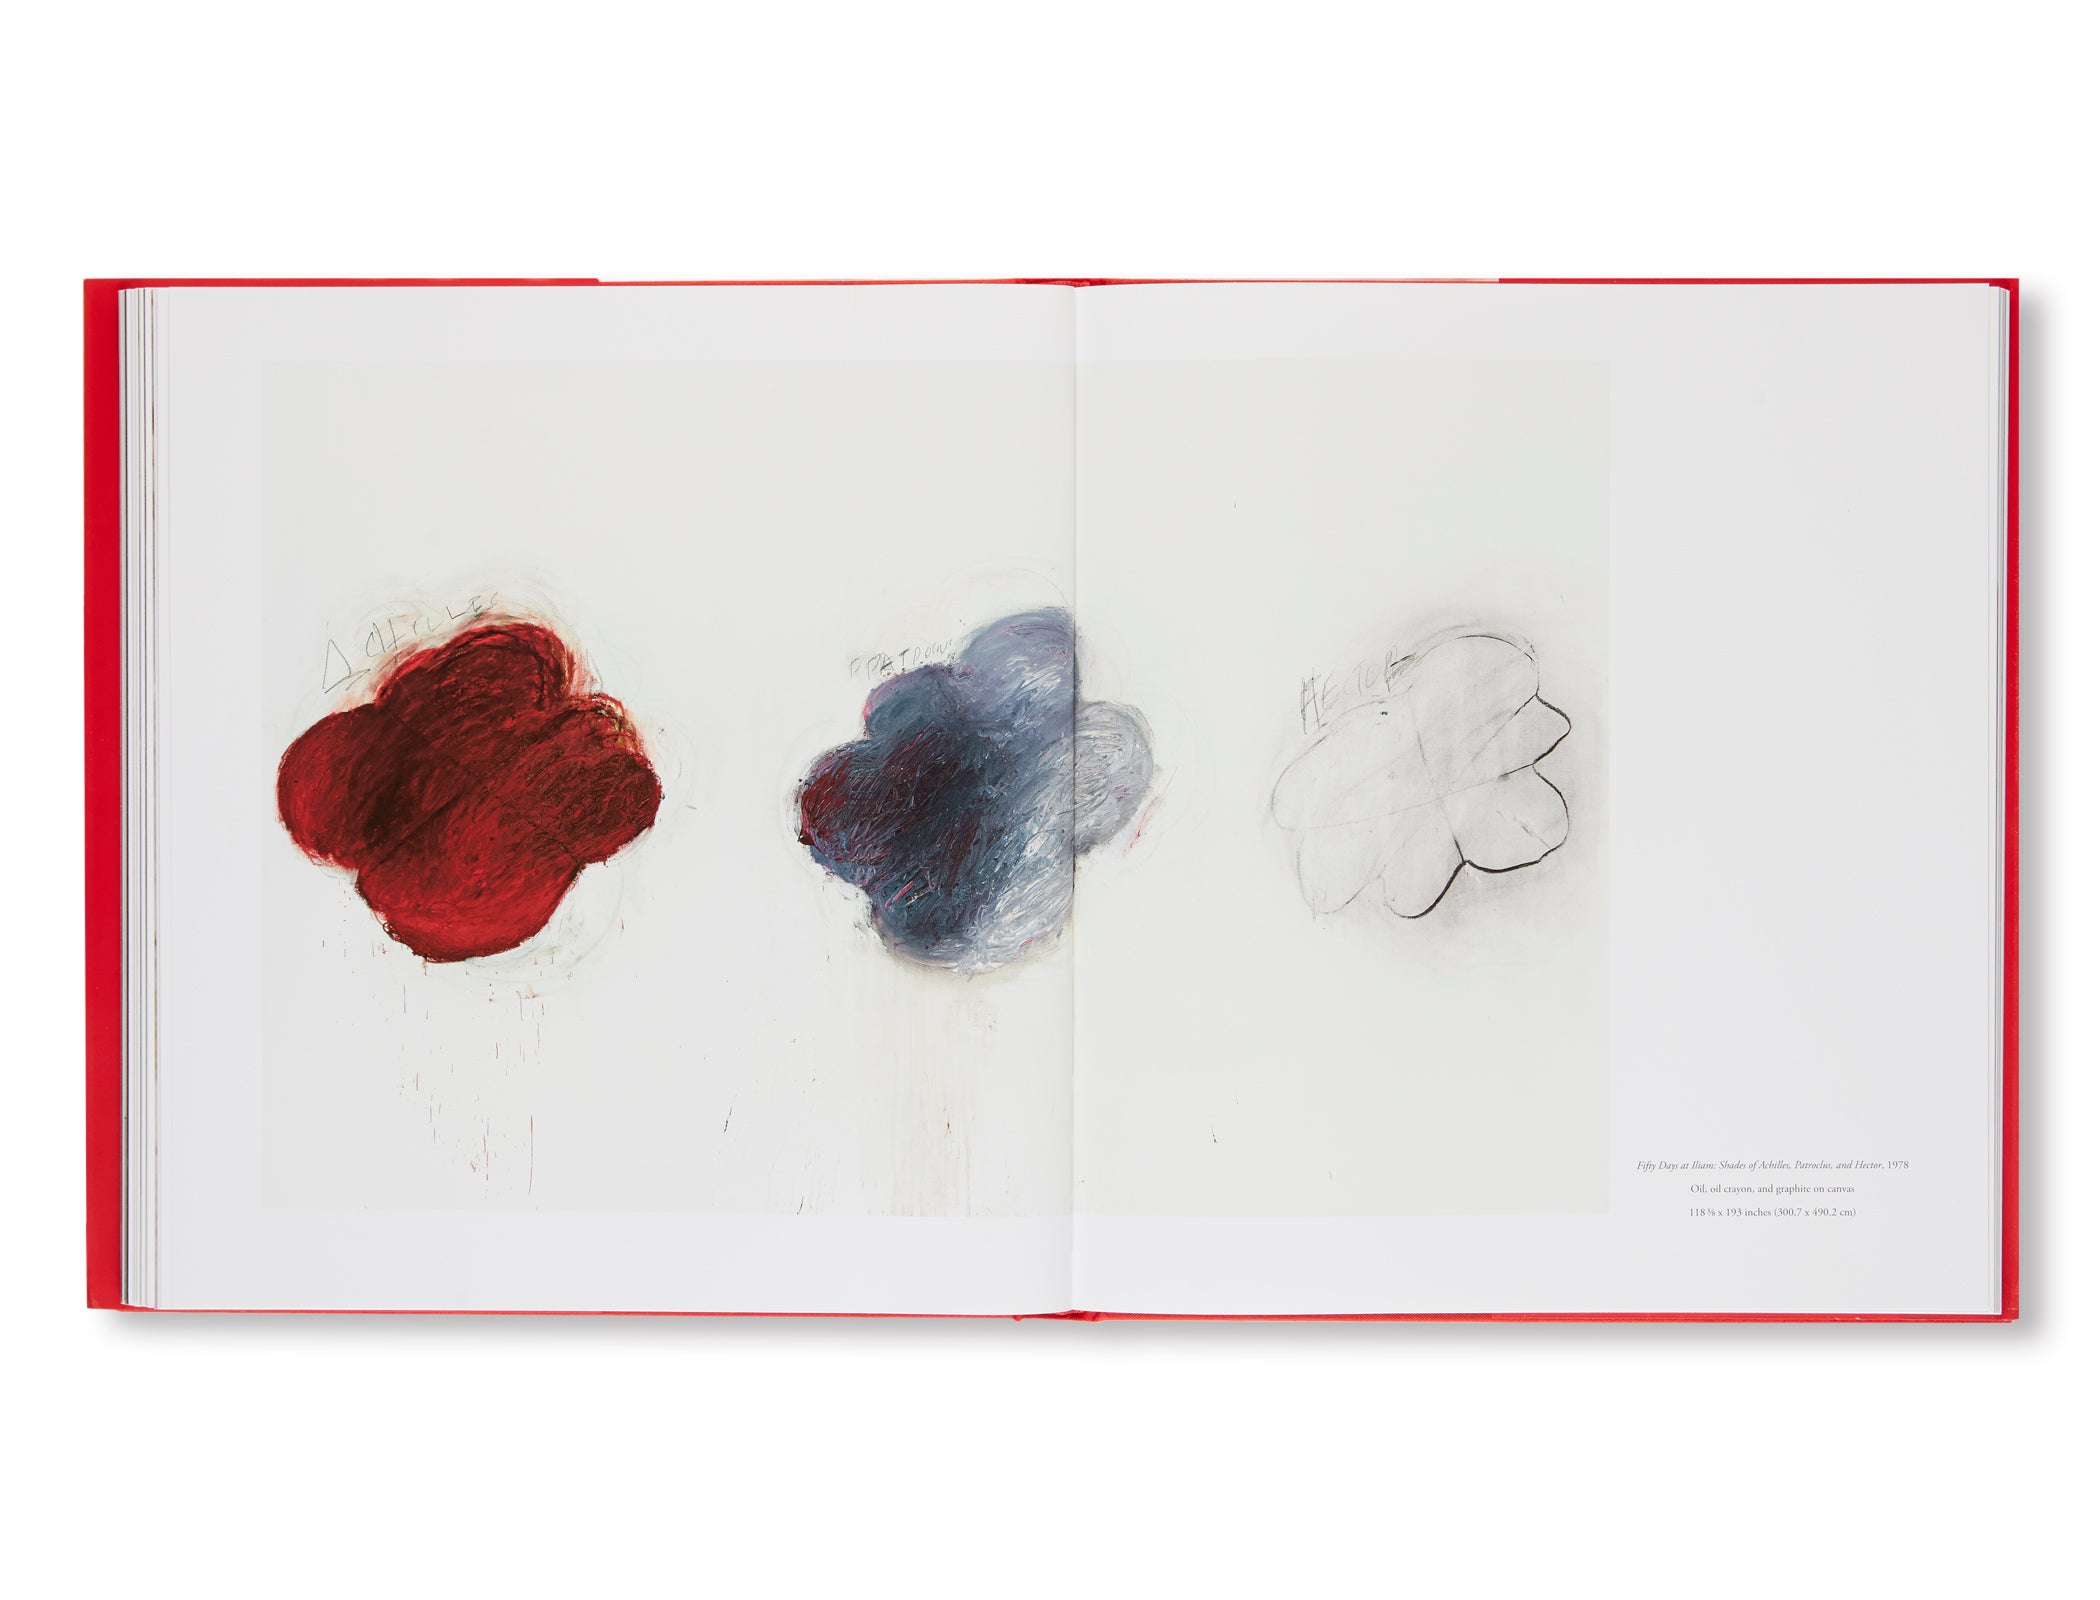 FIFTY DAYS AT ILIAM by Cy Twombly